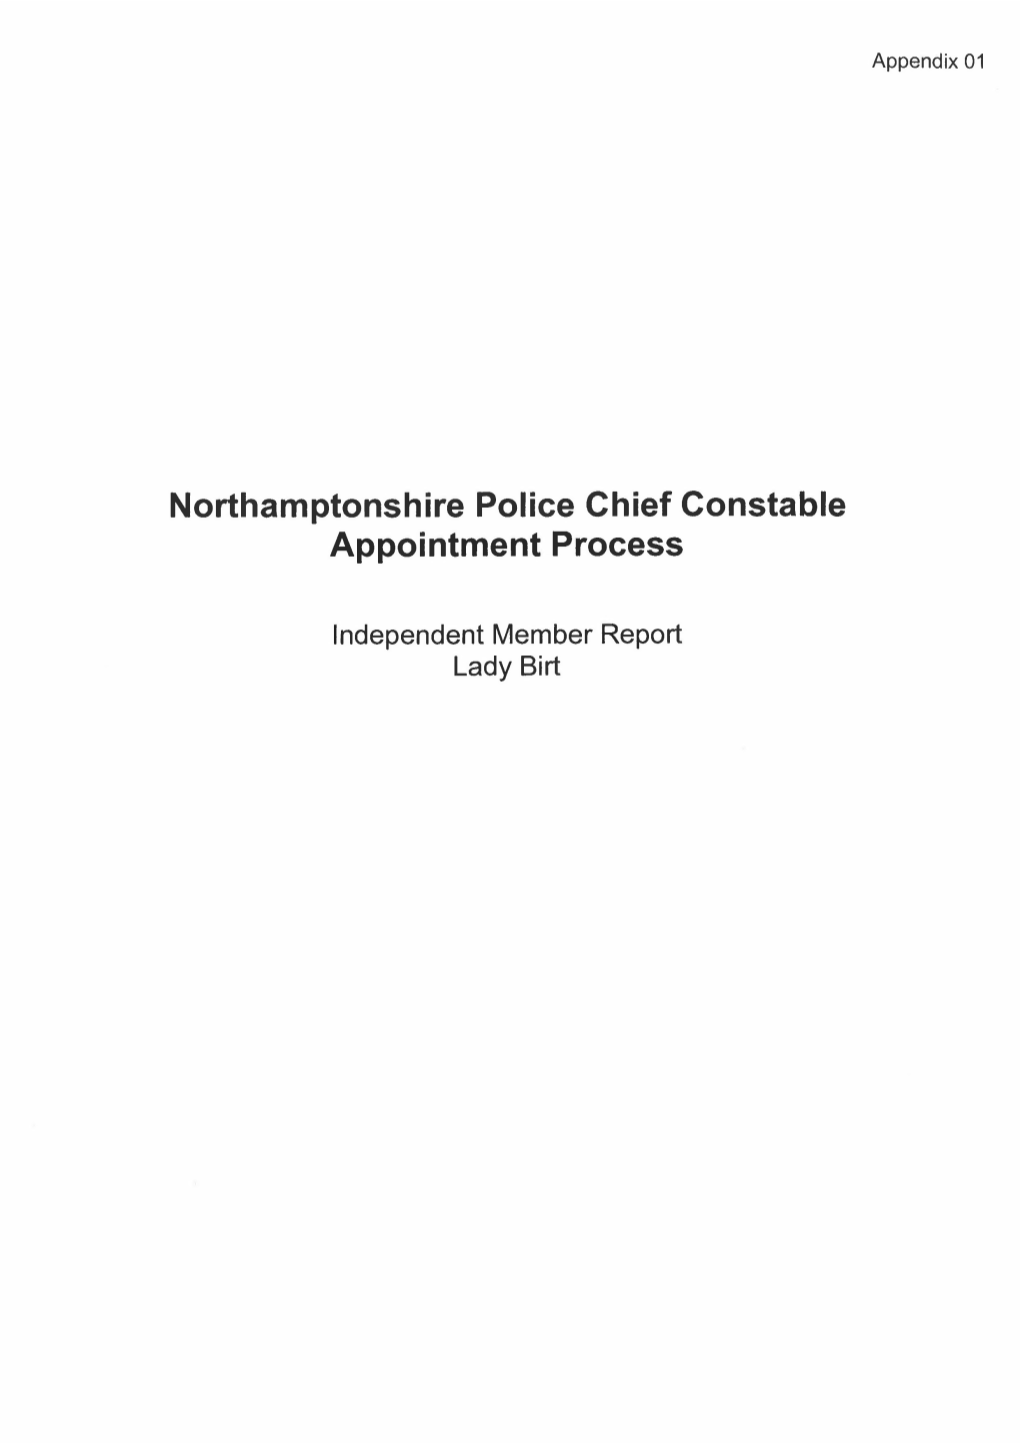 Northamptonshire Police Chief Constable Appointment Process